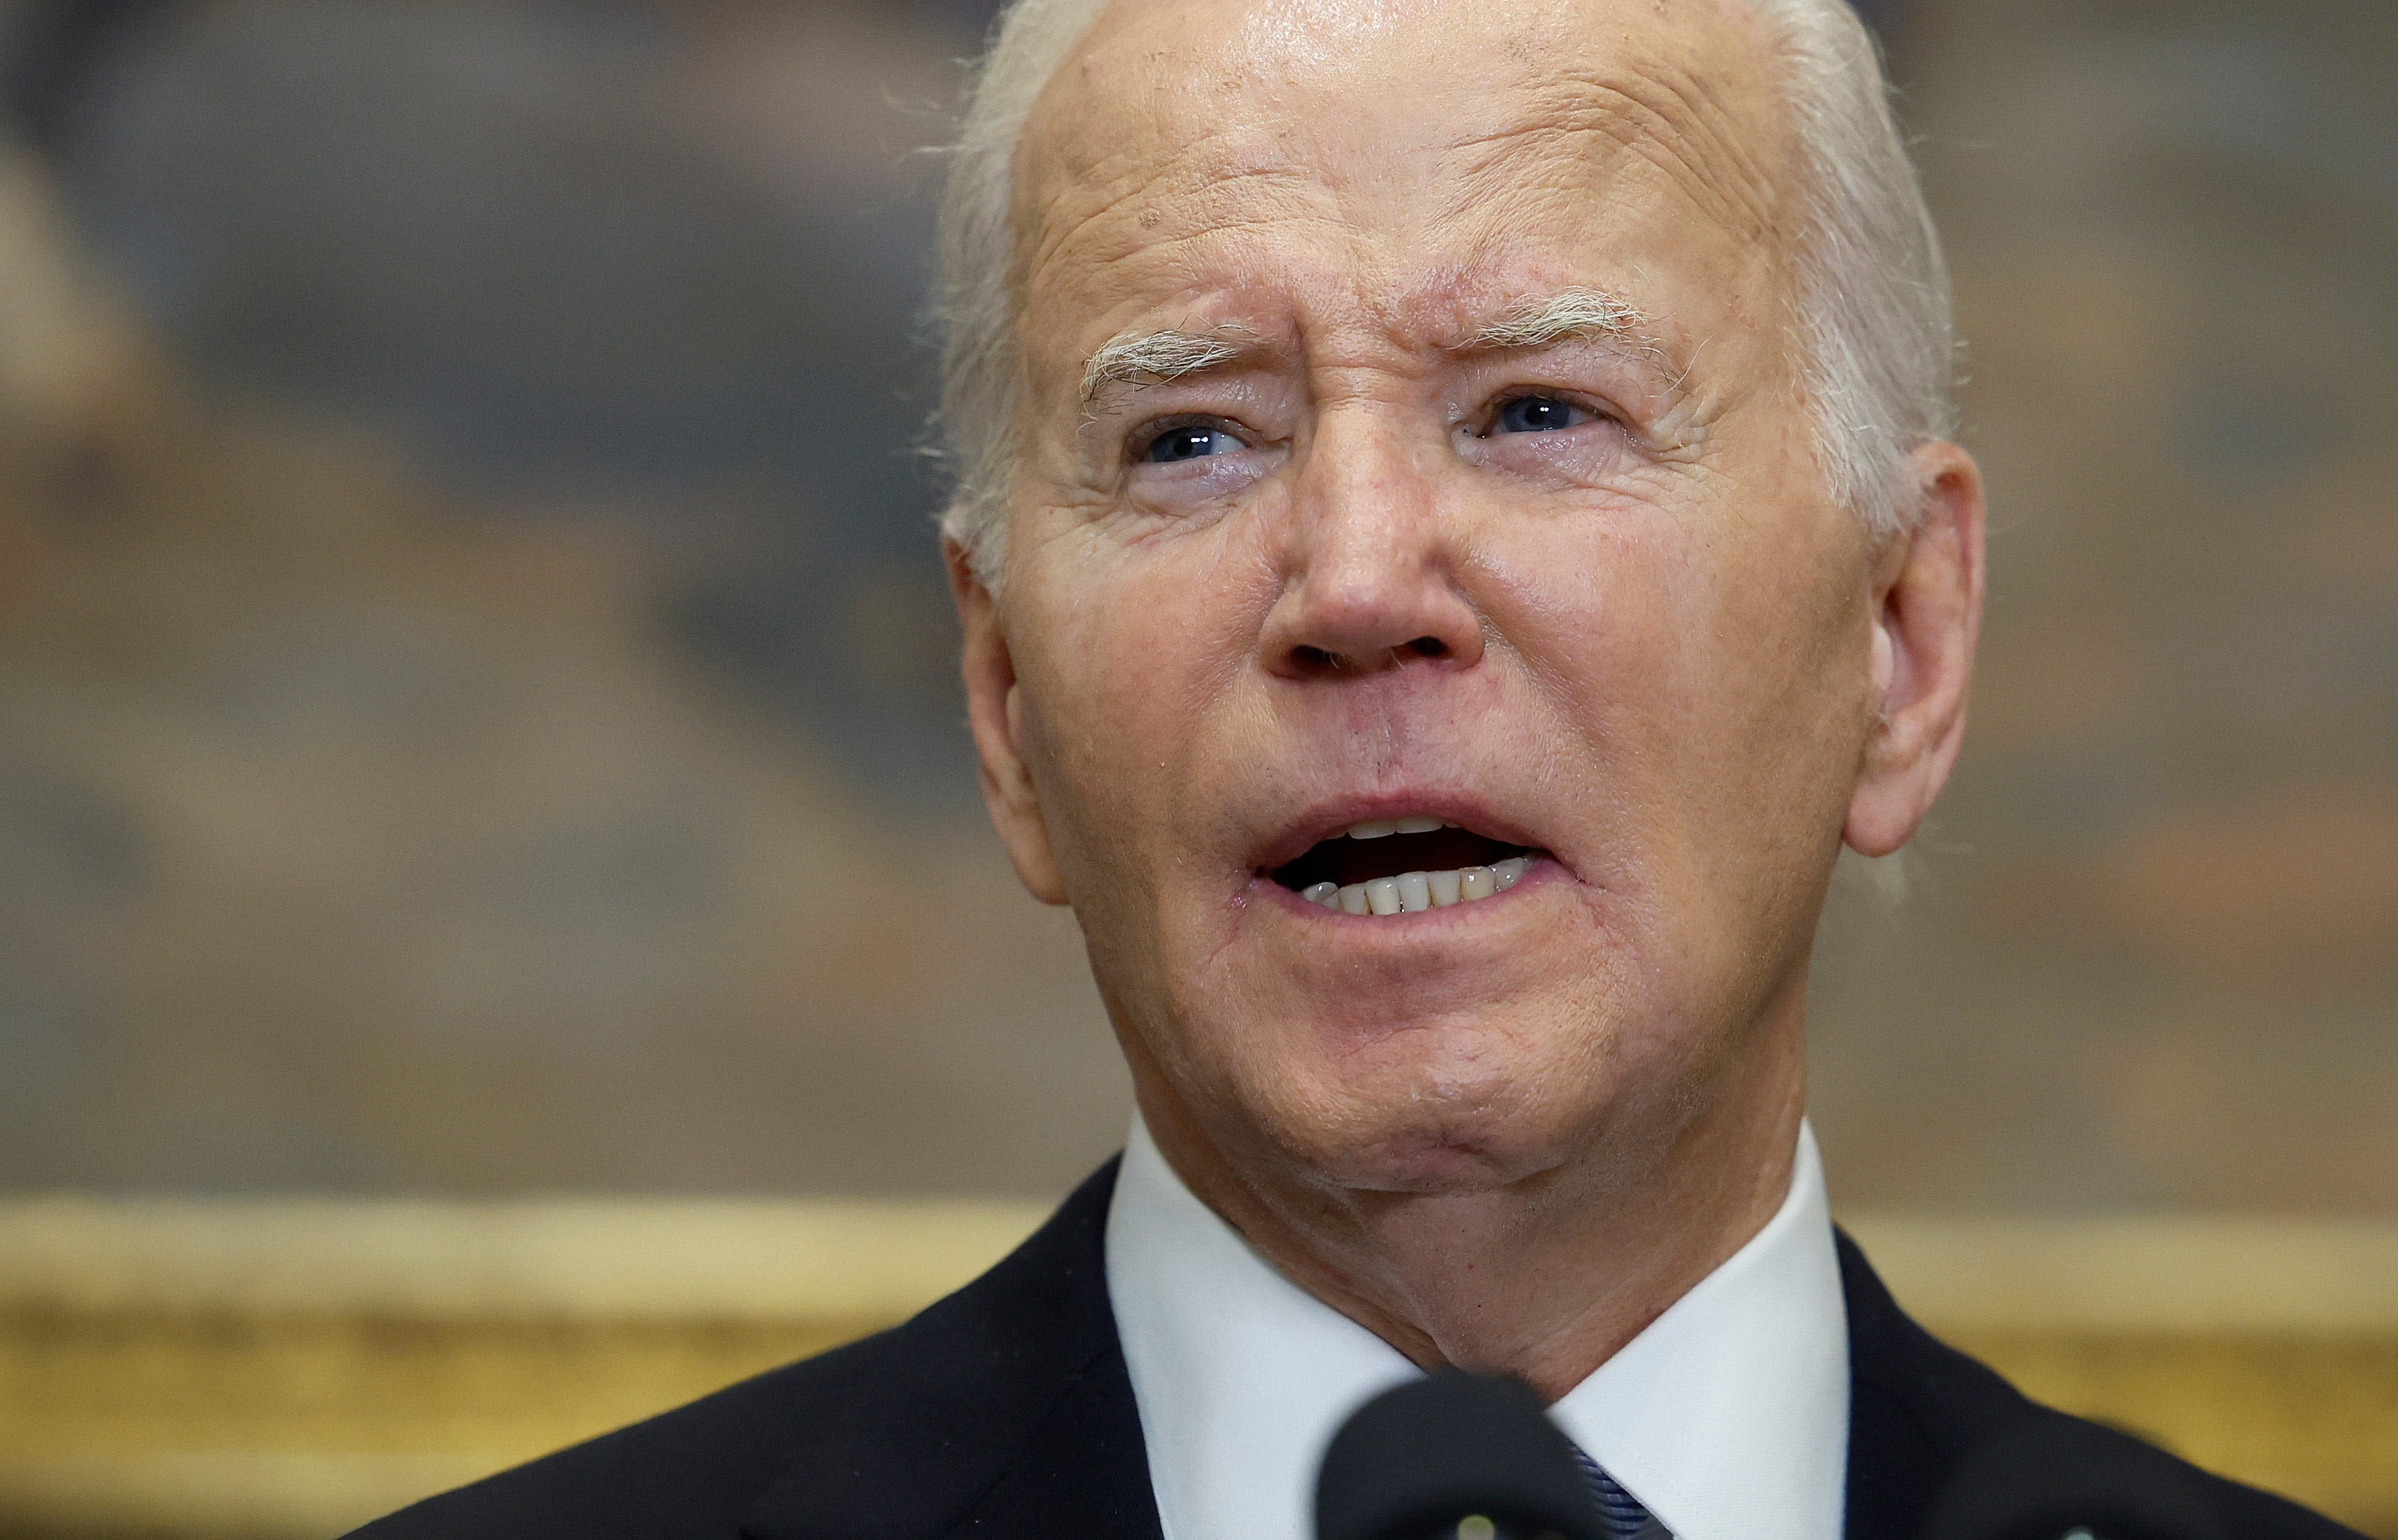 Biden to call for 5% cap on annual rent increases, a critical issue for voters